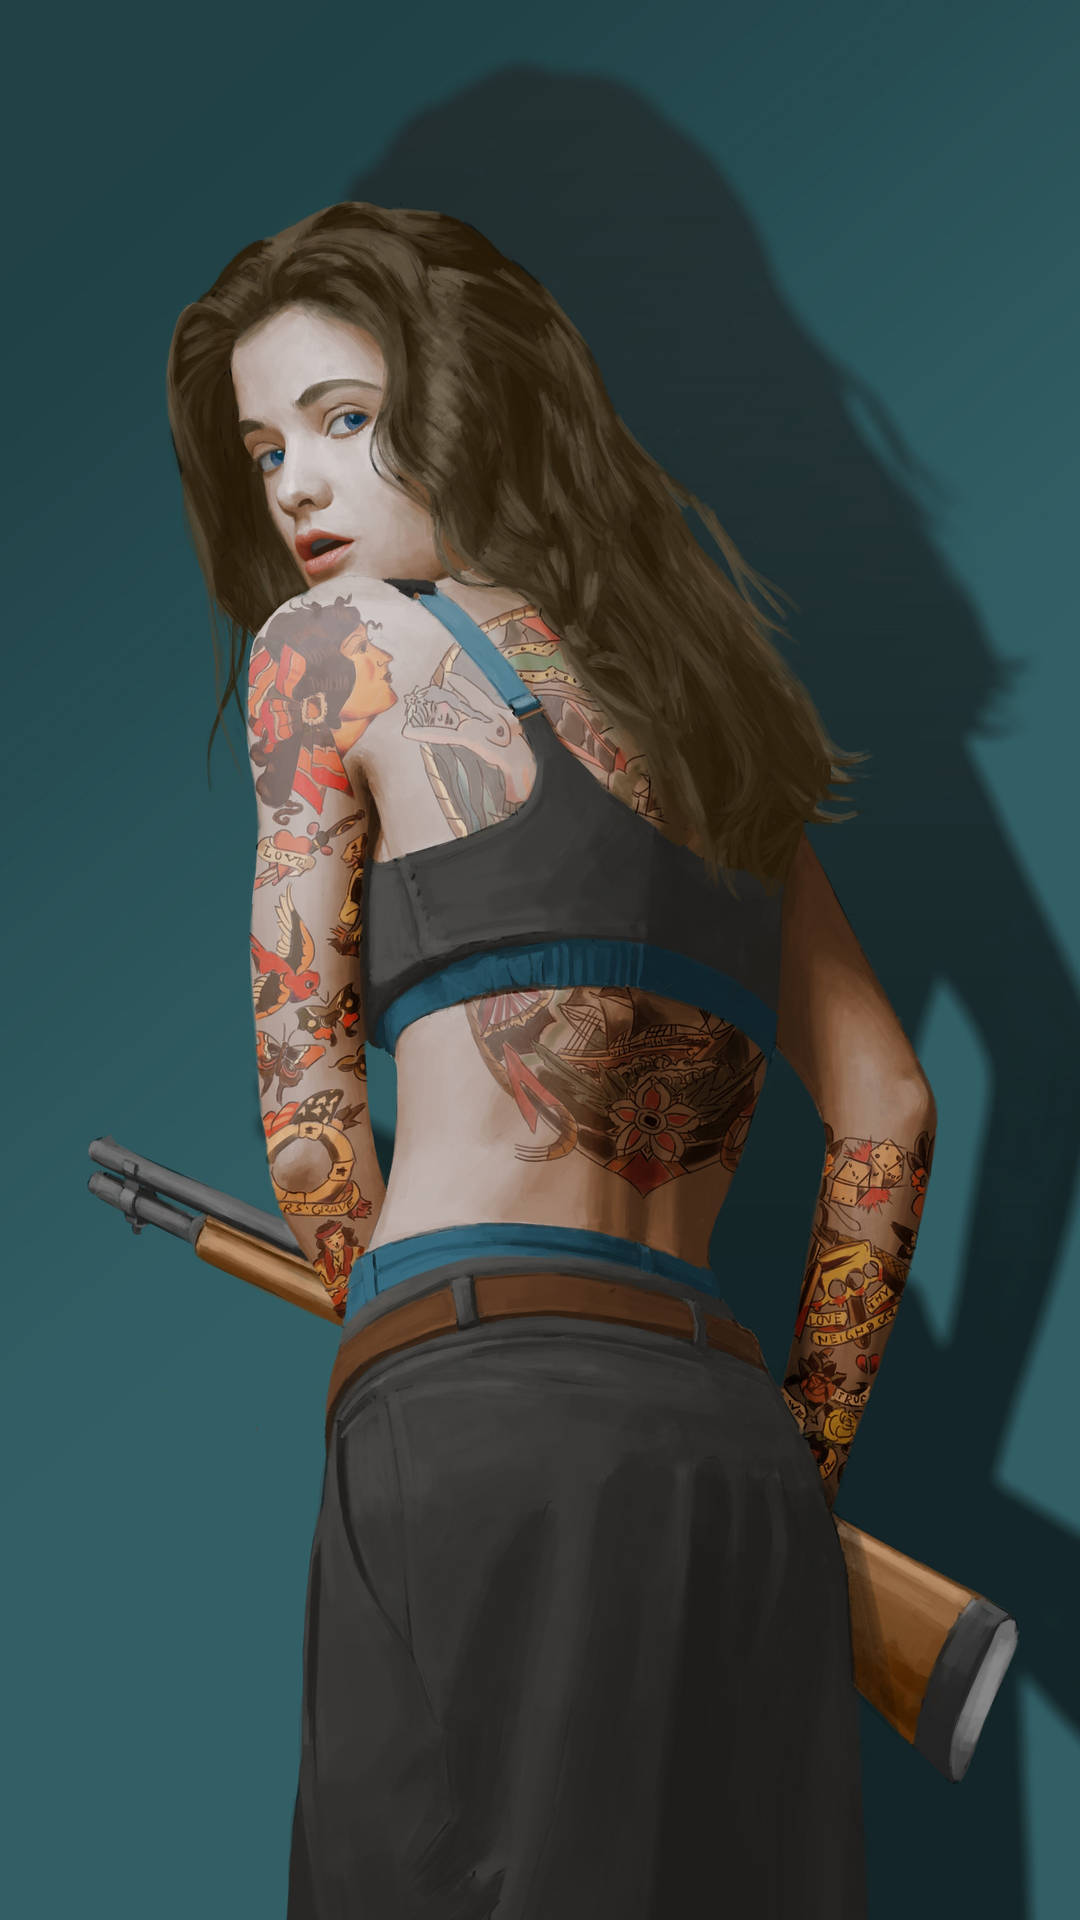 Girl With HD Tattoo And Gun Wallpaper